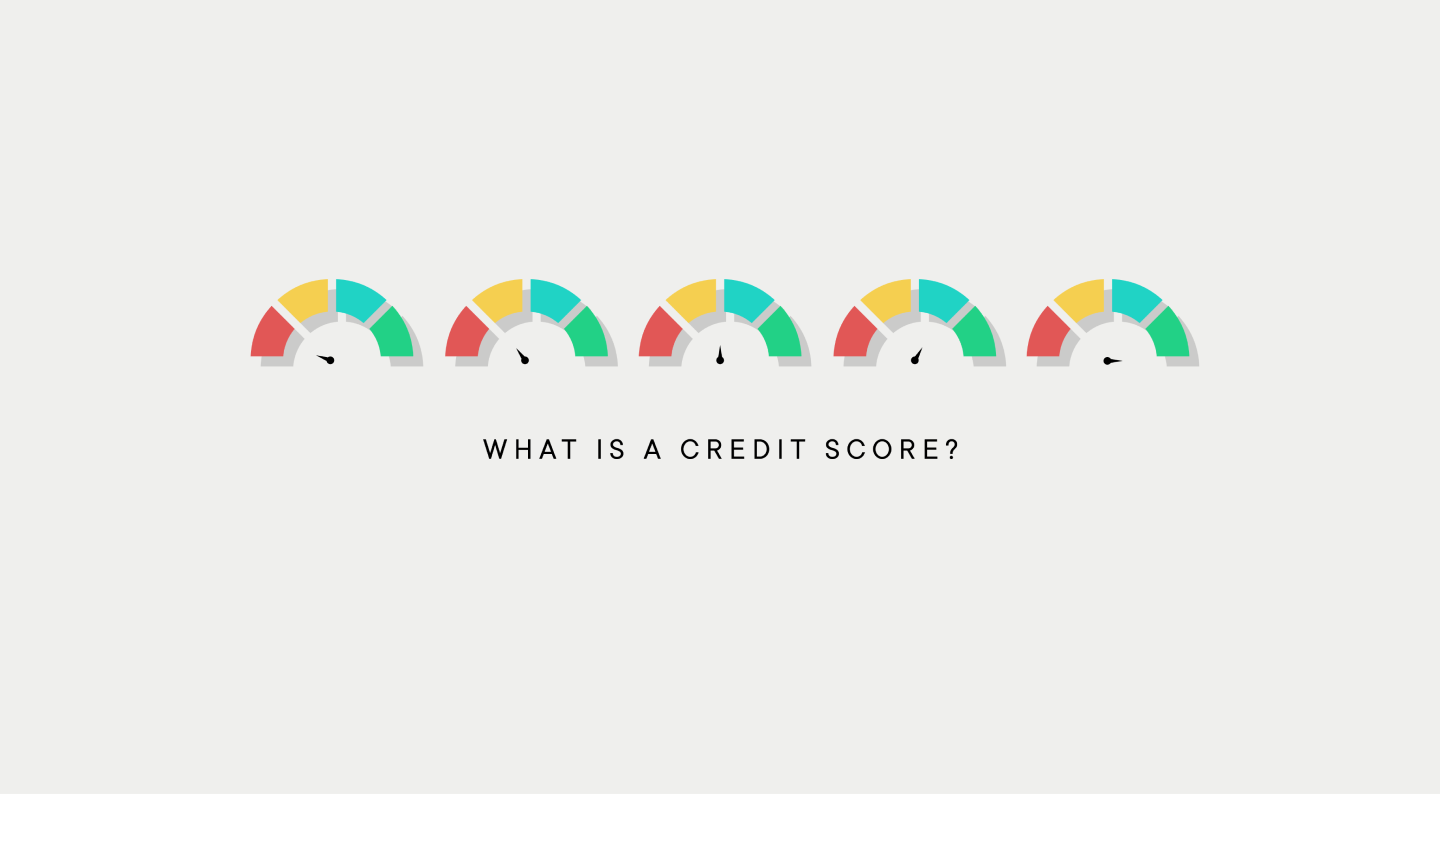 What is a credit score, and why should you care